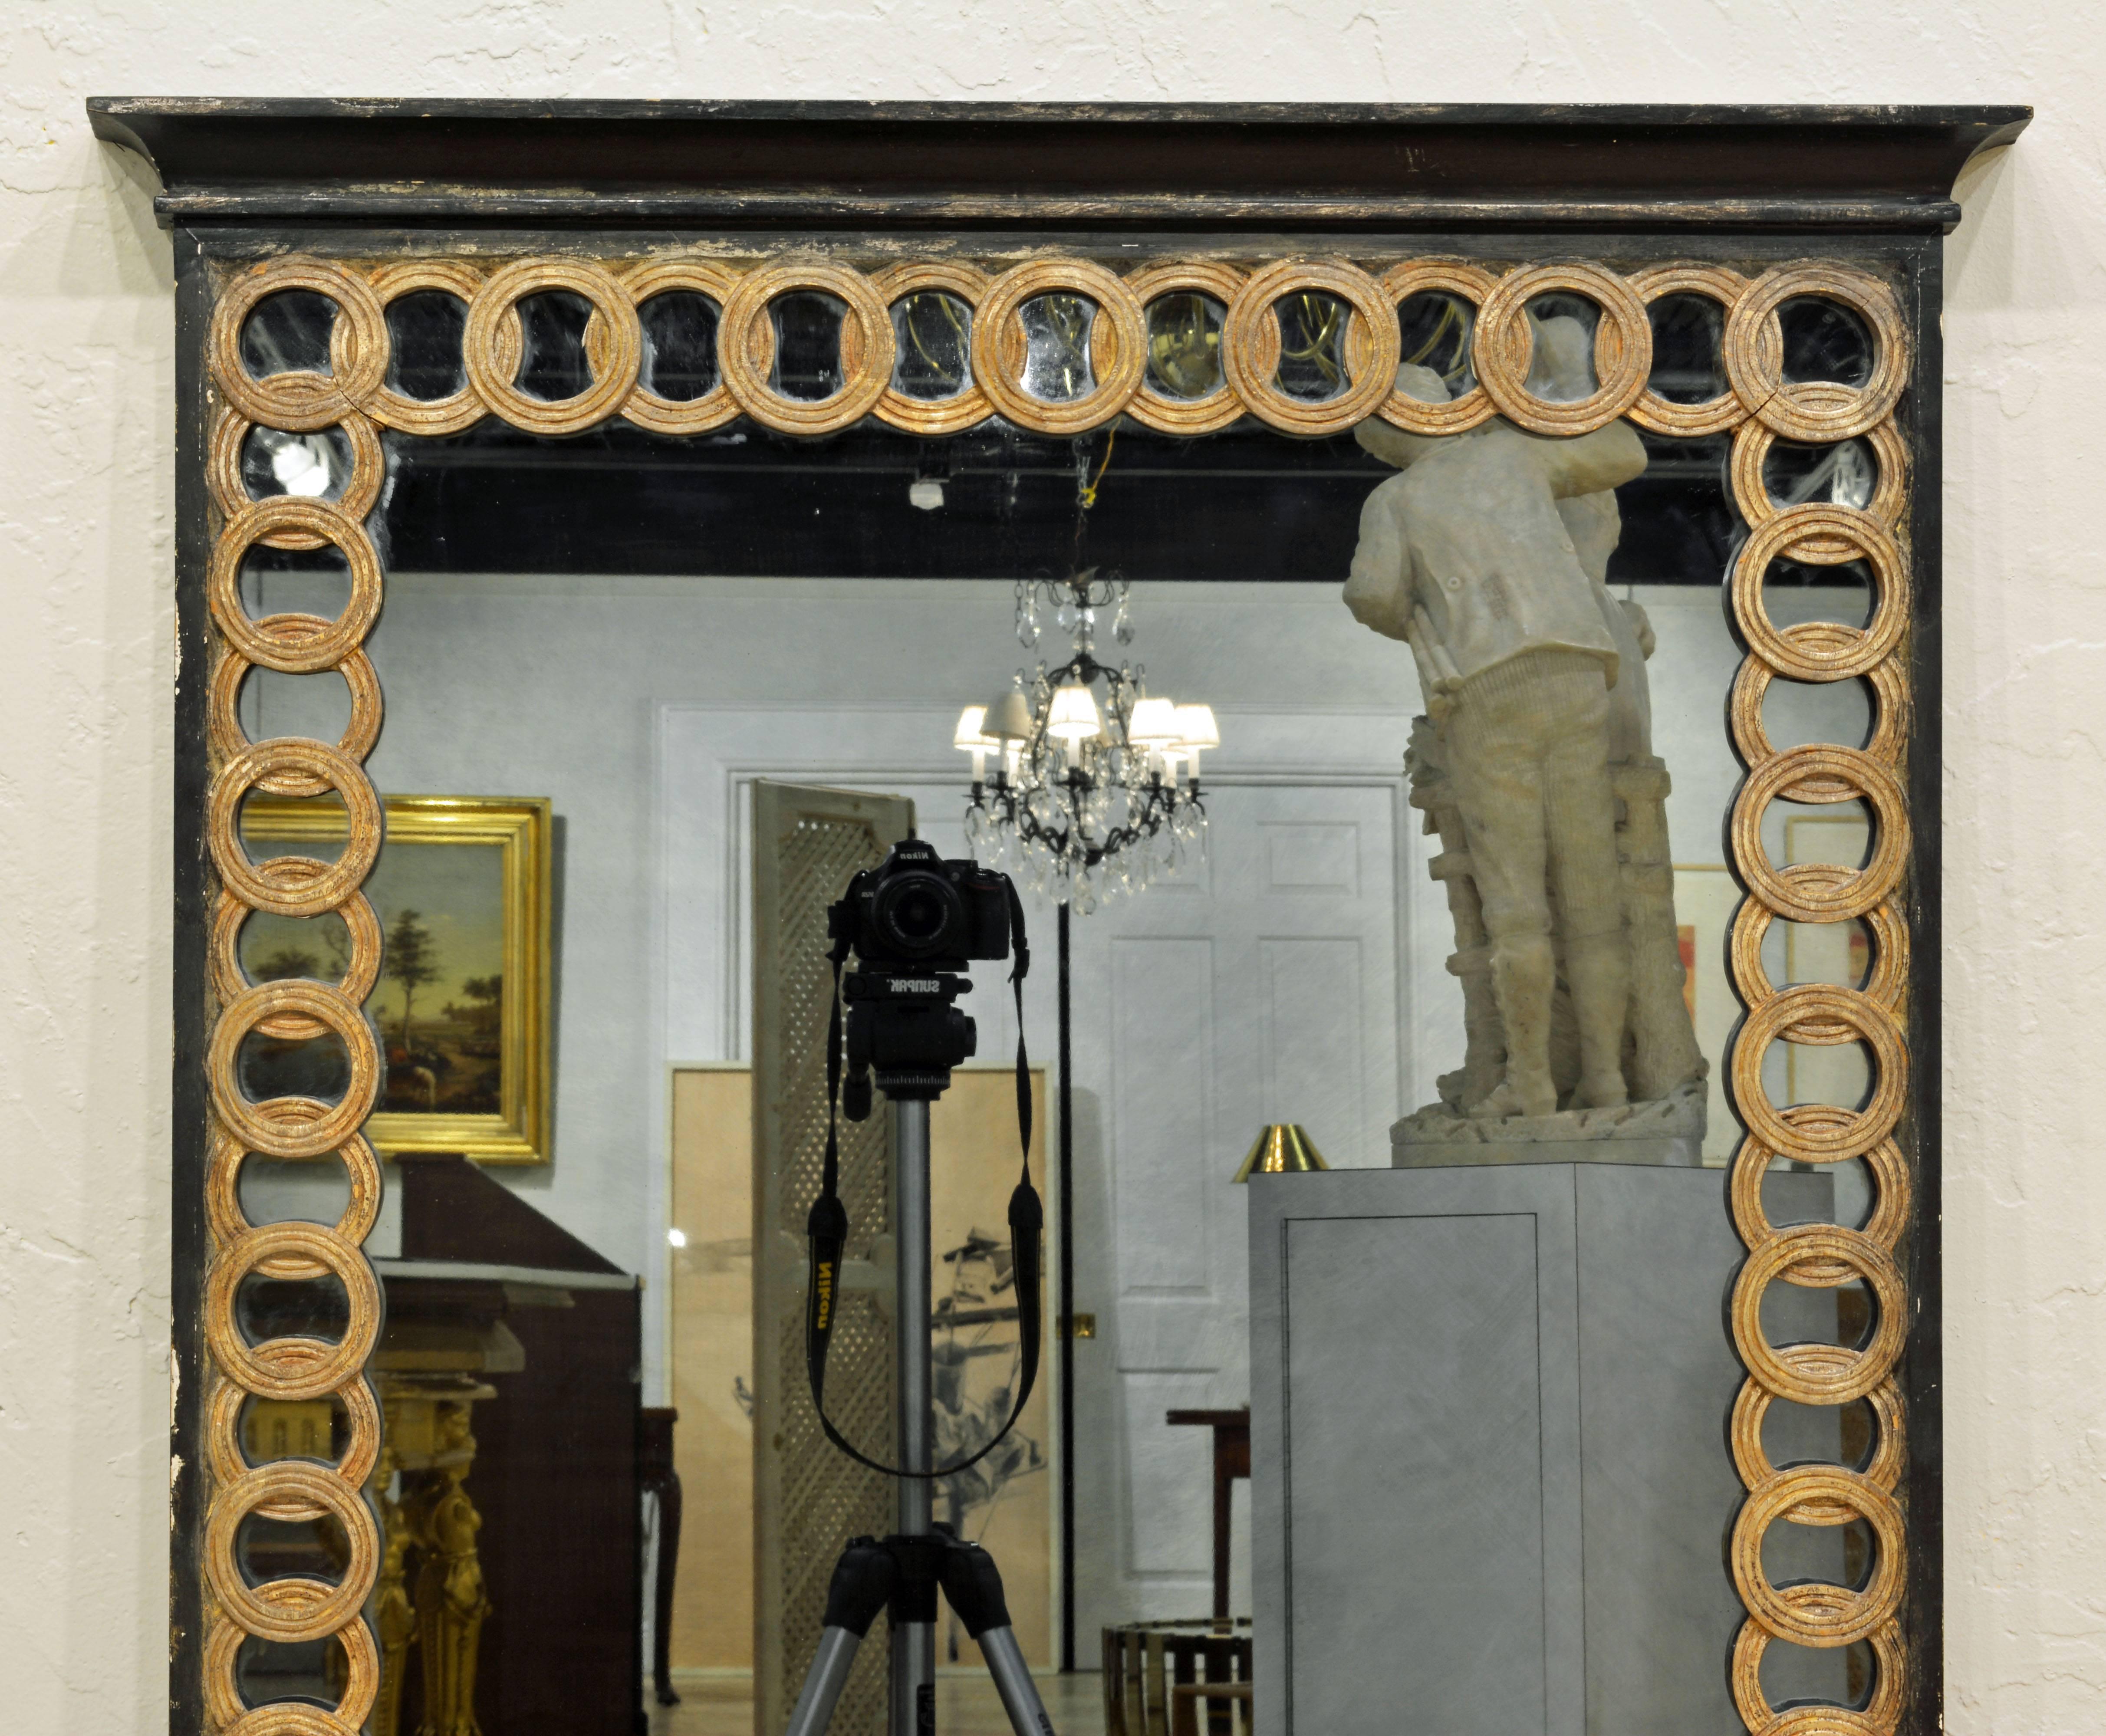 Bordered by the Palladio version of the Celtic Ring frieze this mirror features a combination of black frame and gilt rings, a motif also used in other Palladio items. Standing almost 53 inches tall, the mirror is great for many purposes.